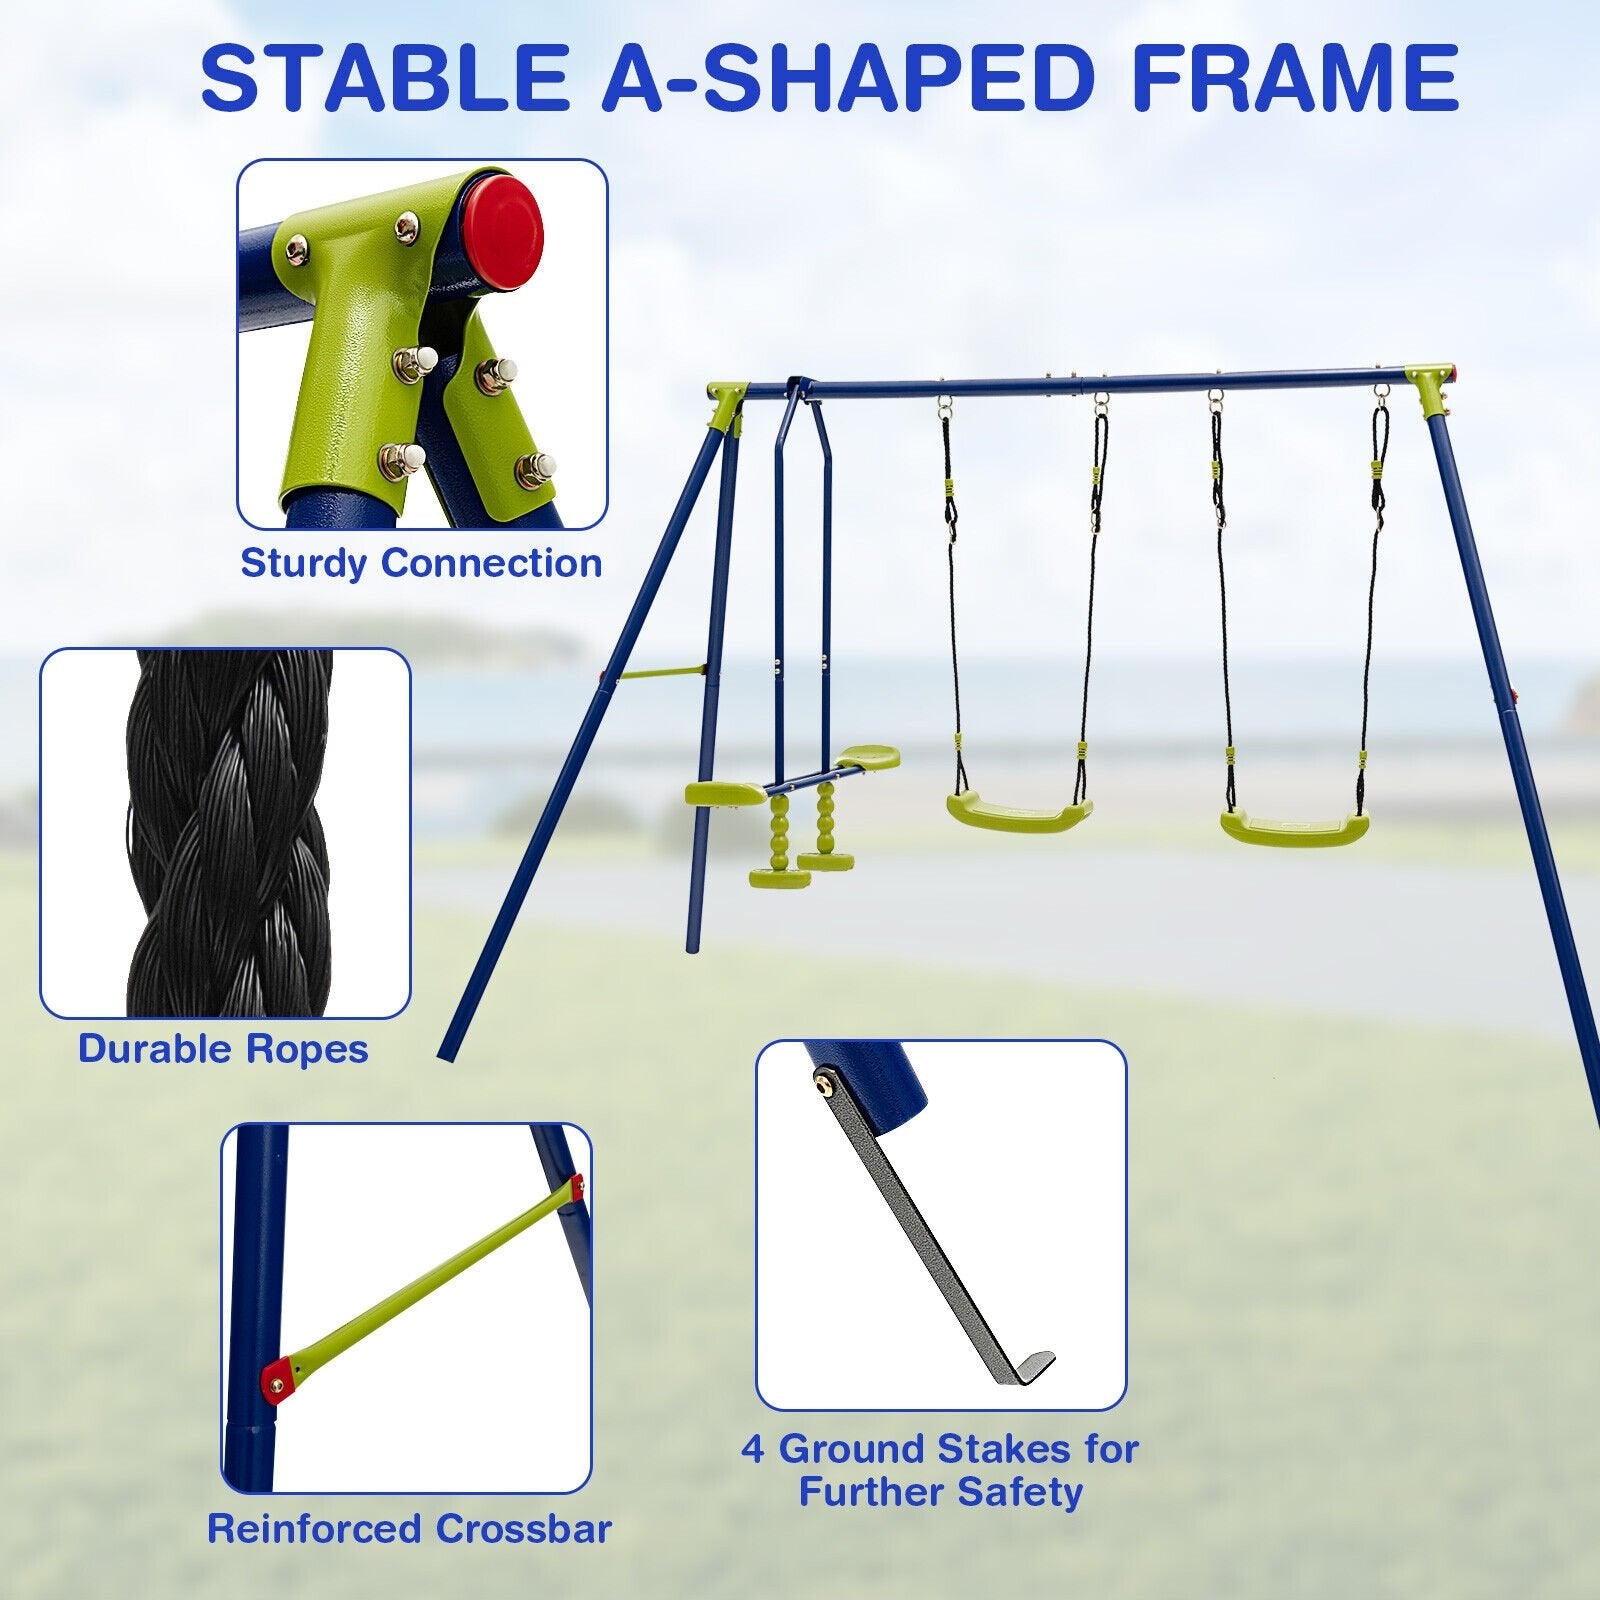 440 Pounds Kids Swing Set with Two Swings and One Glider, Blue - Gallery Canada